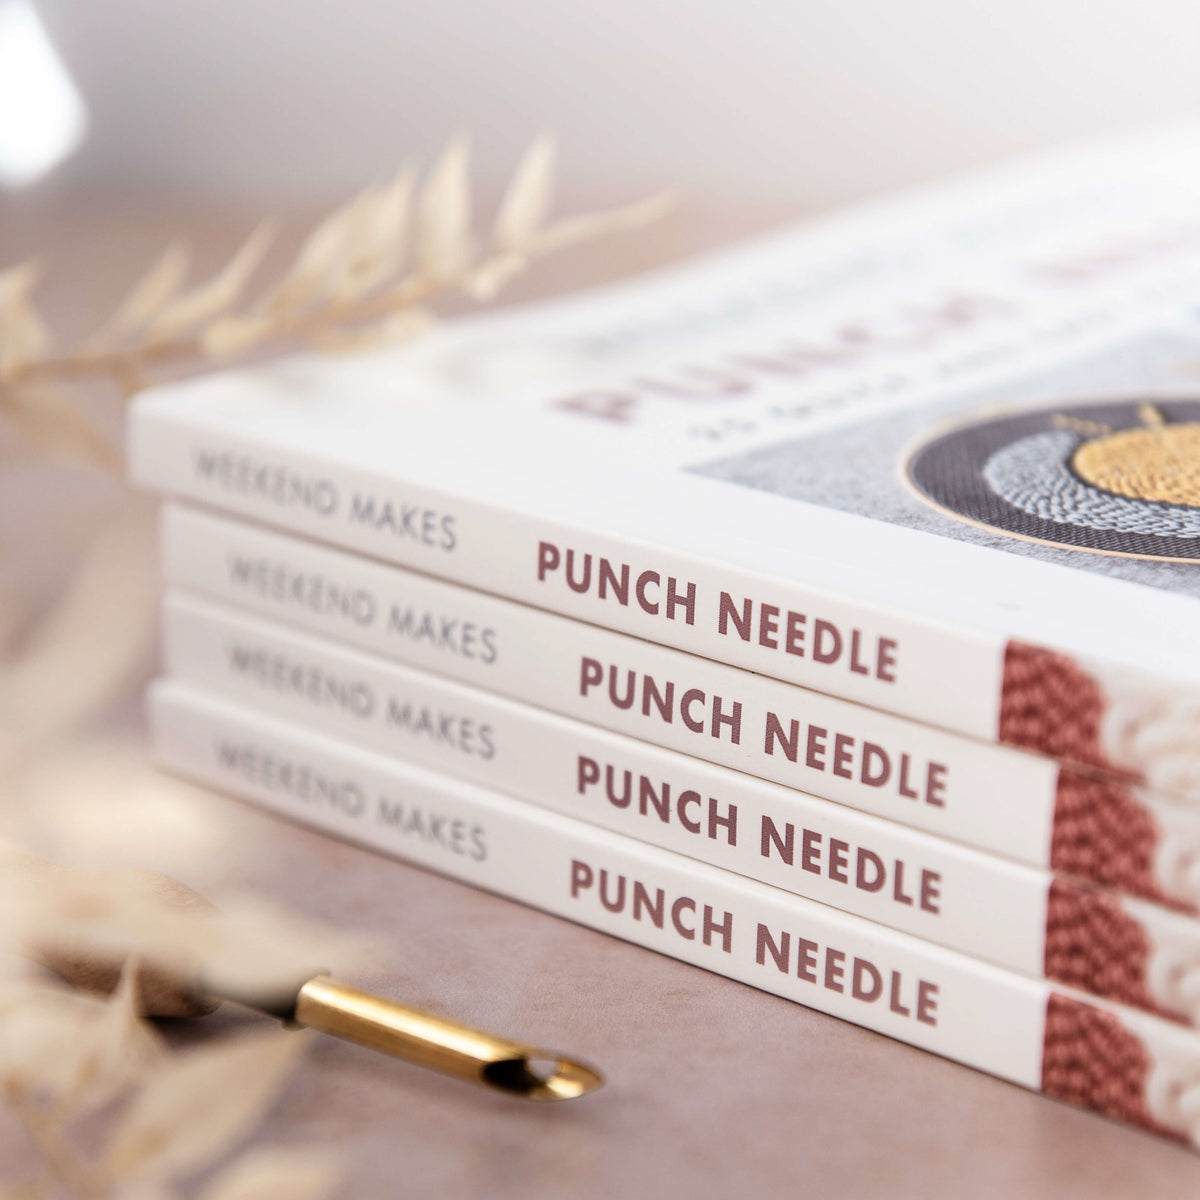 Stack of Weekend Makes: Punch Needle books